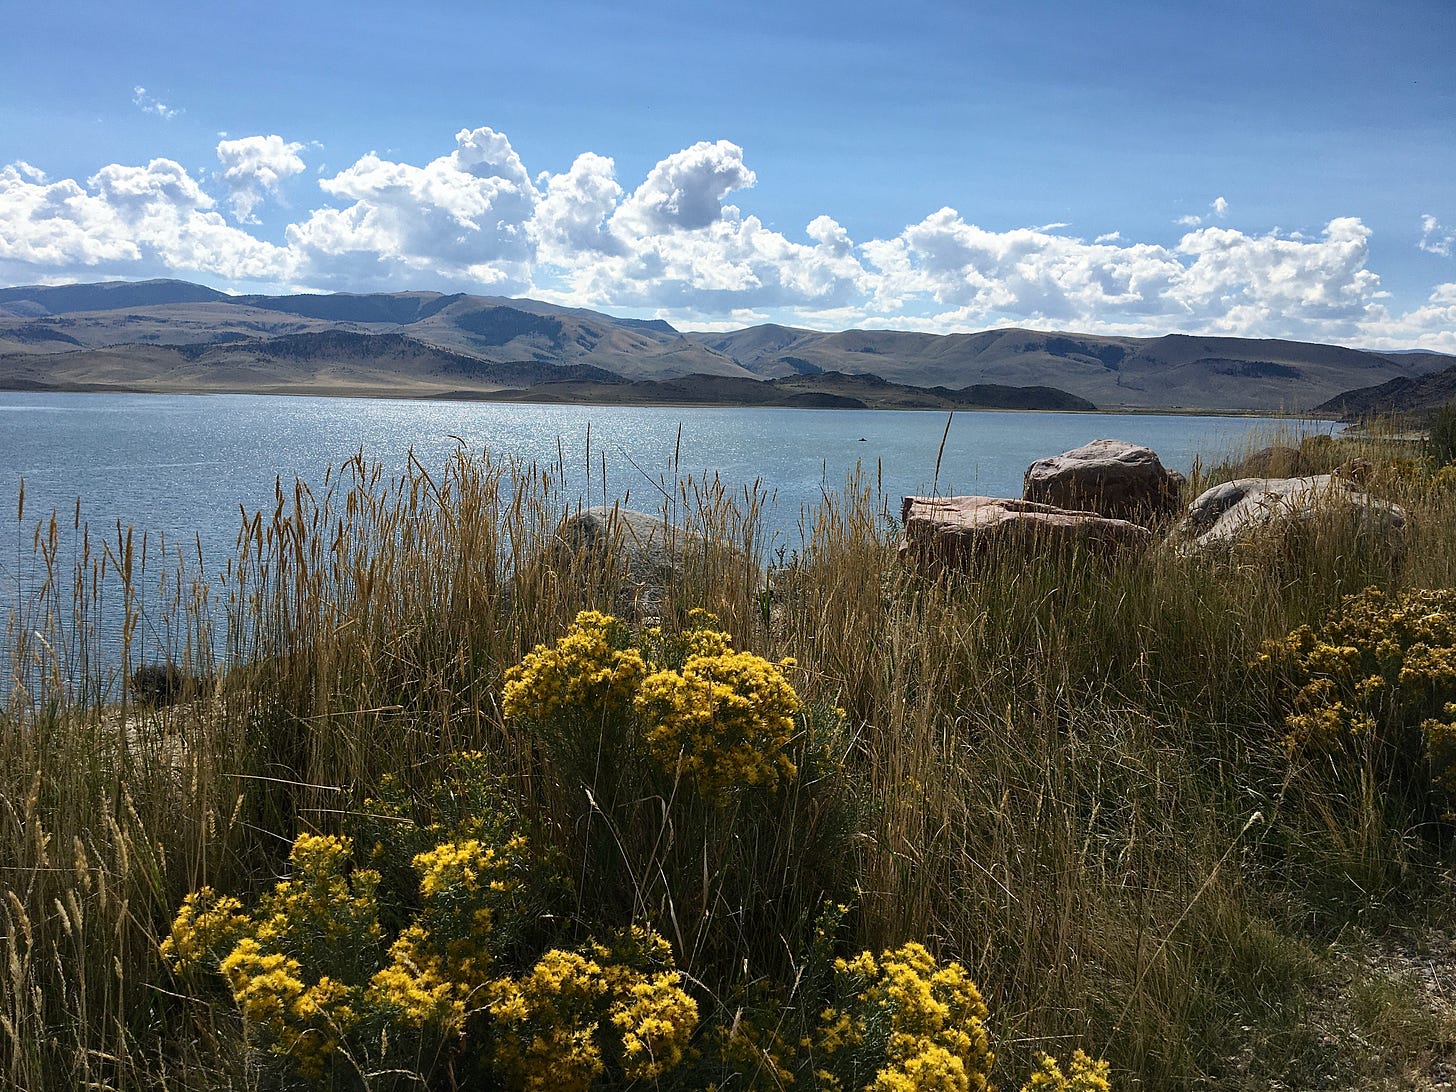 Photograph of a sparkling lake on a sunny, blue-sky day. There are puffy white clouds along a ridge of mountains across the lake. Up close there are tall grasses with bunches of yellow flowers amongst large rocks. 